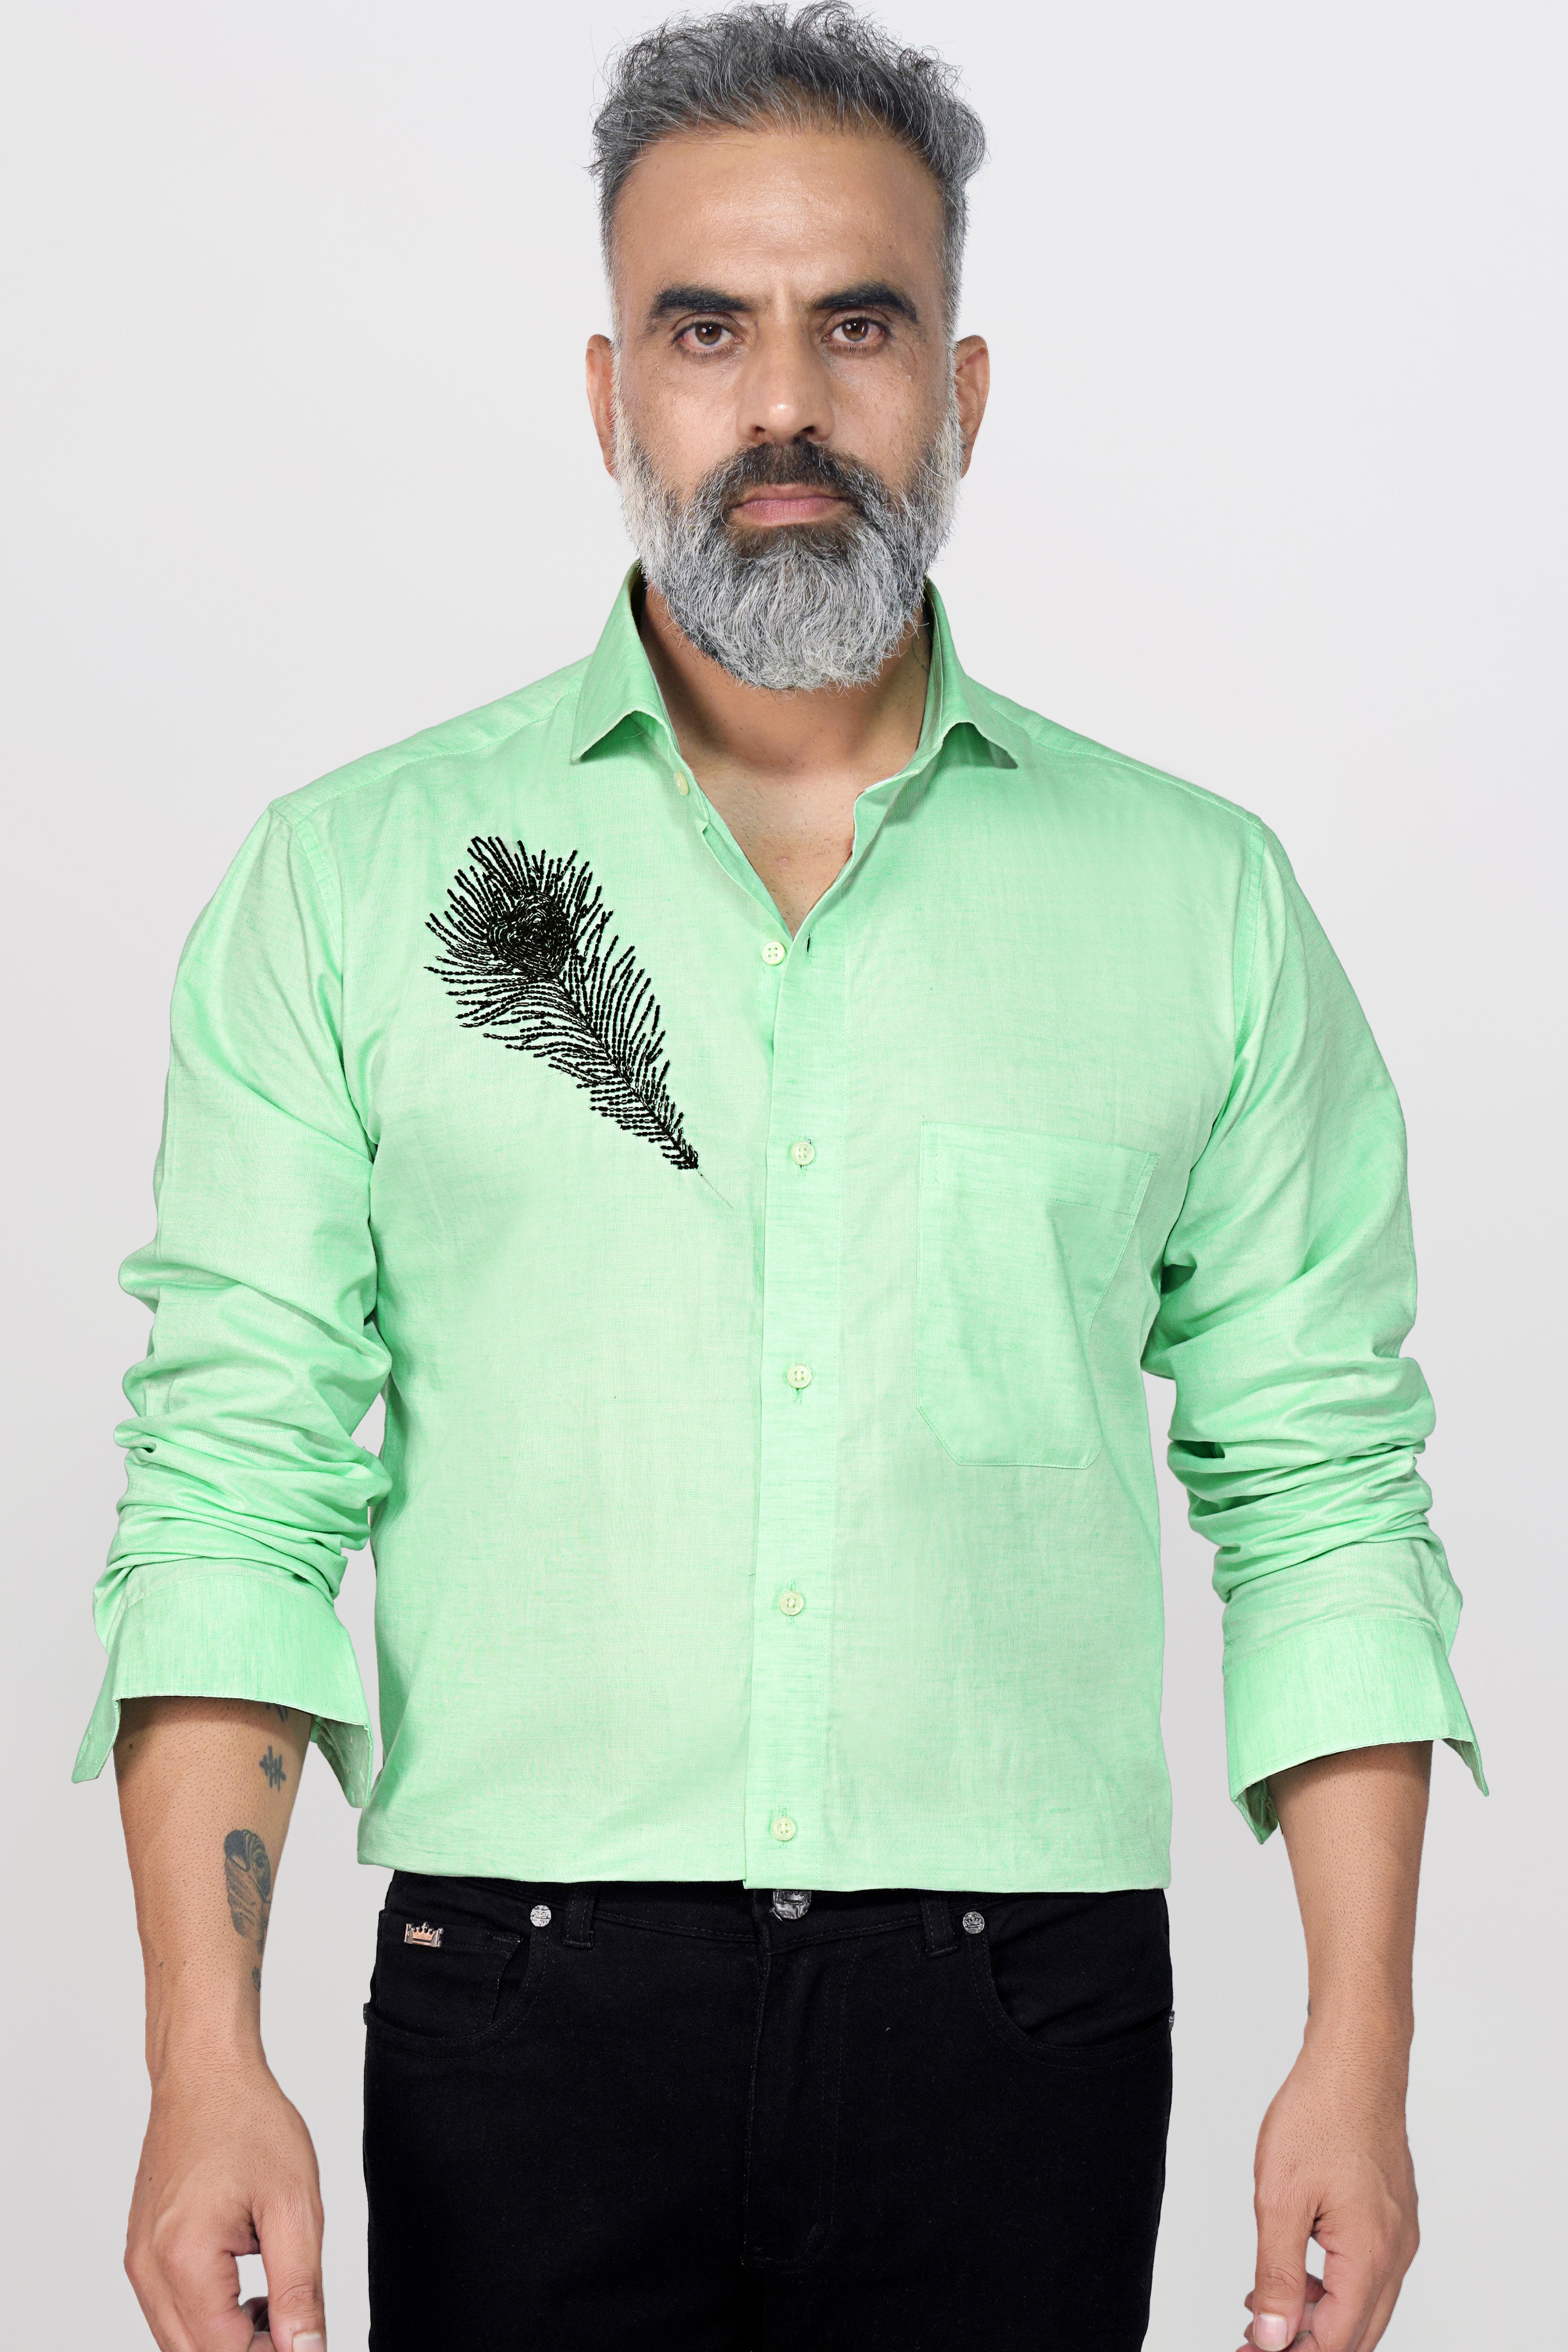 Vista Green Peacock Feather Hand Embroidered Royal Oxford Designer Shirt